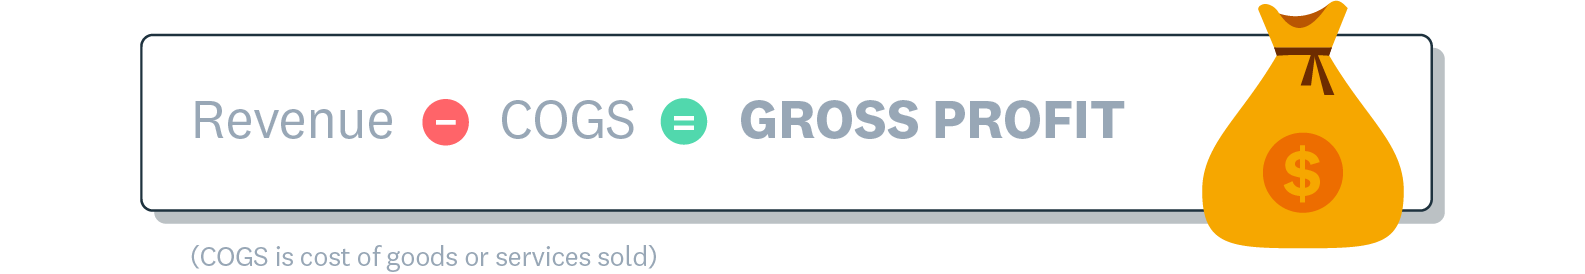 Gross profit formula shows that revenue minus the cost of goods or services sold equals gross profit.